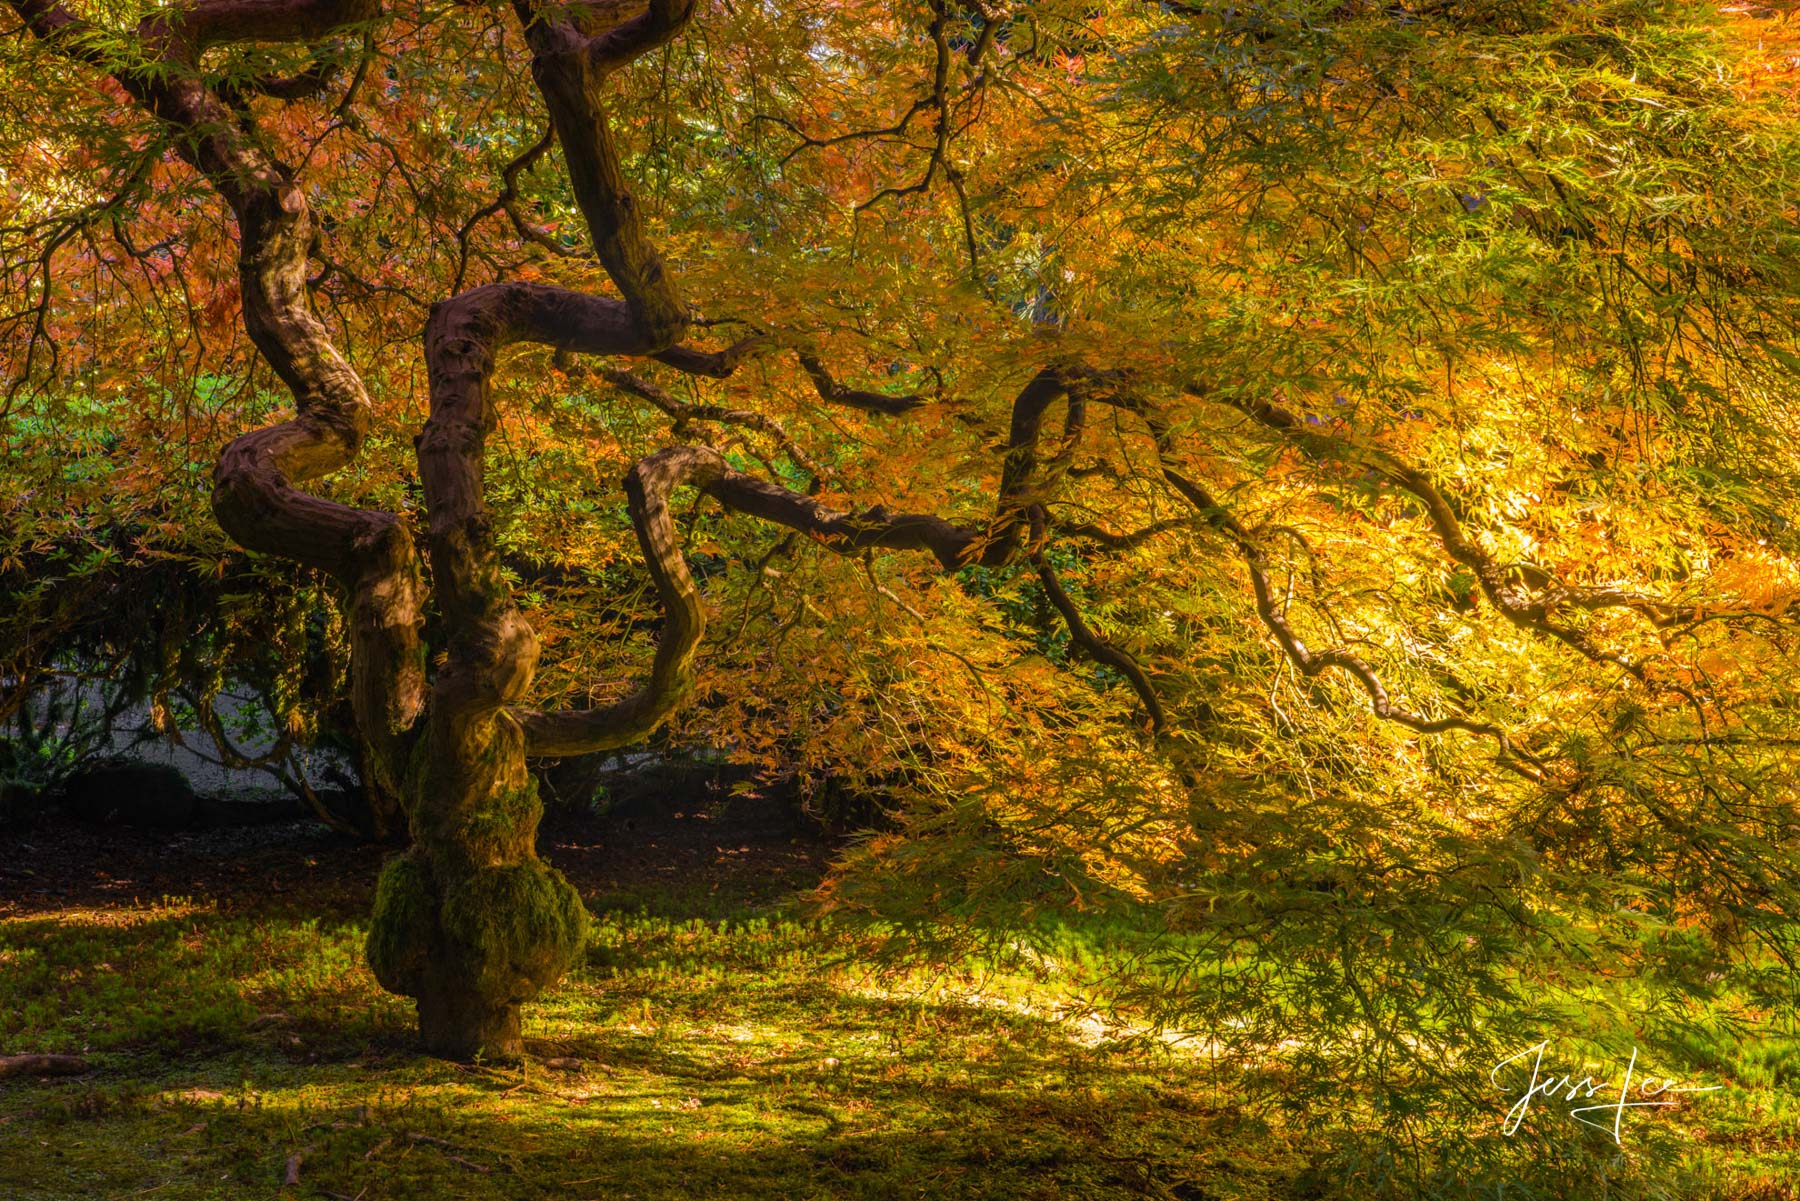 Limited Edition of 50 Exclusive high-resolution Museum Quality Fine Art Prints of the Golden Glow of this famous Maple in the...